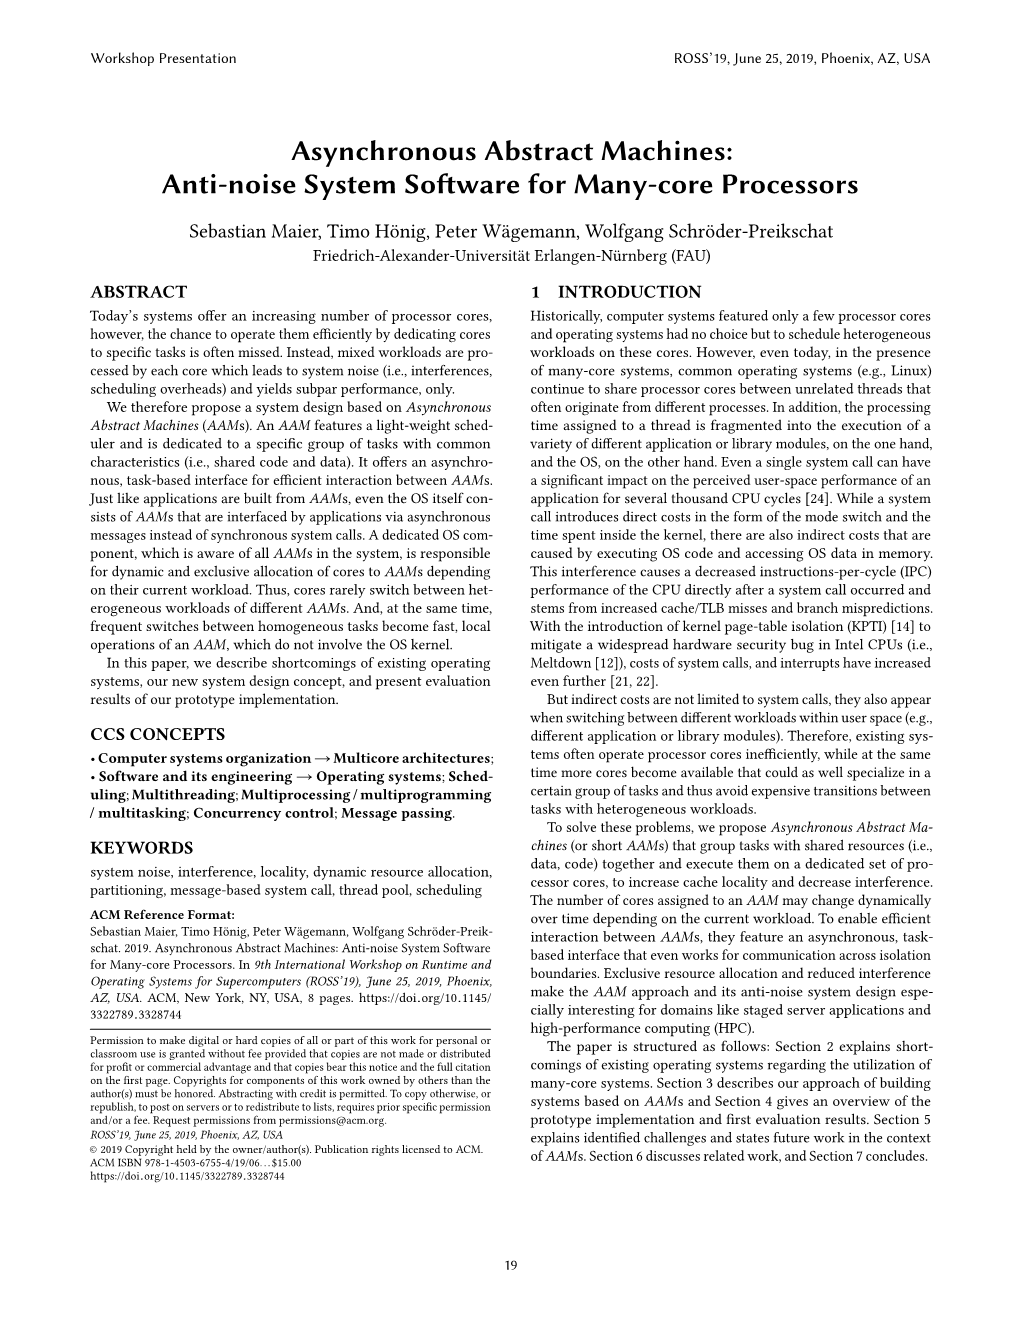 Asynchronous Abstract Machines: Anti-Noise System Software for Many-Core Processors